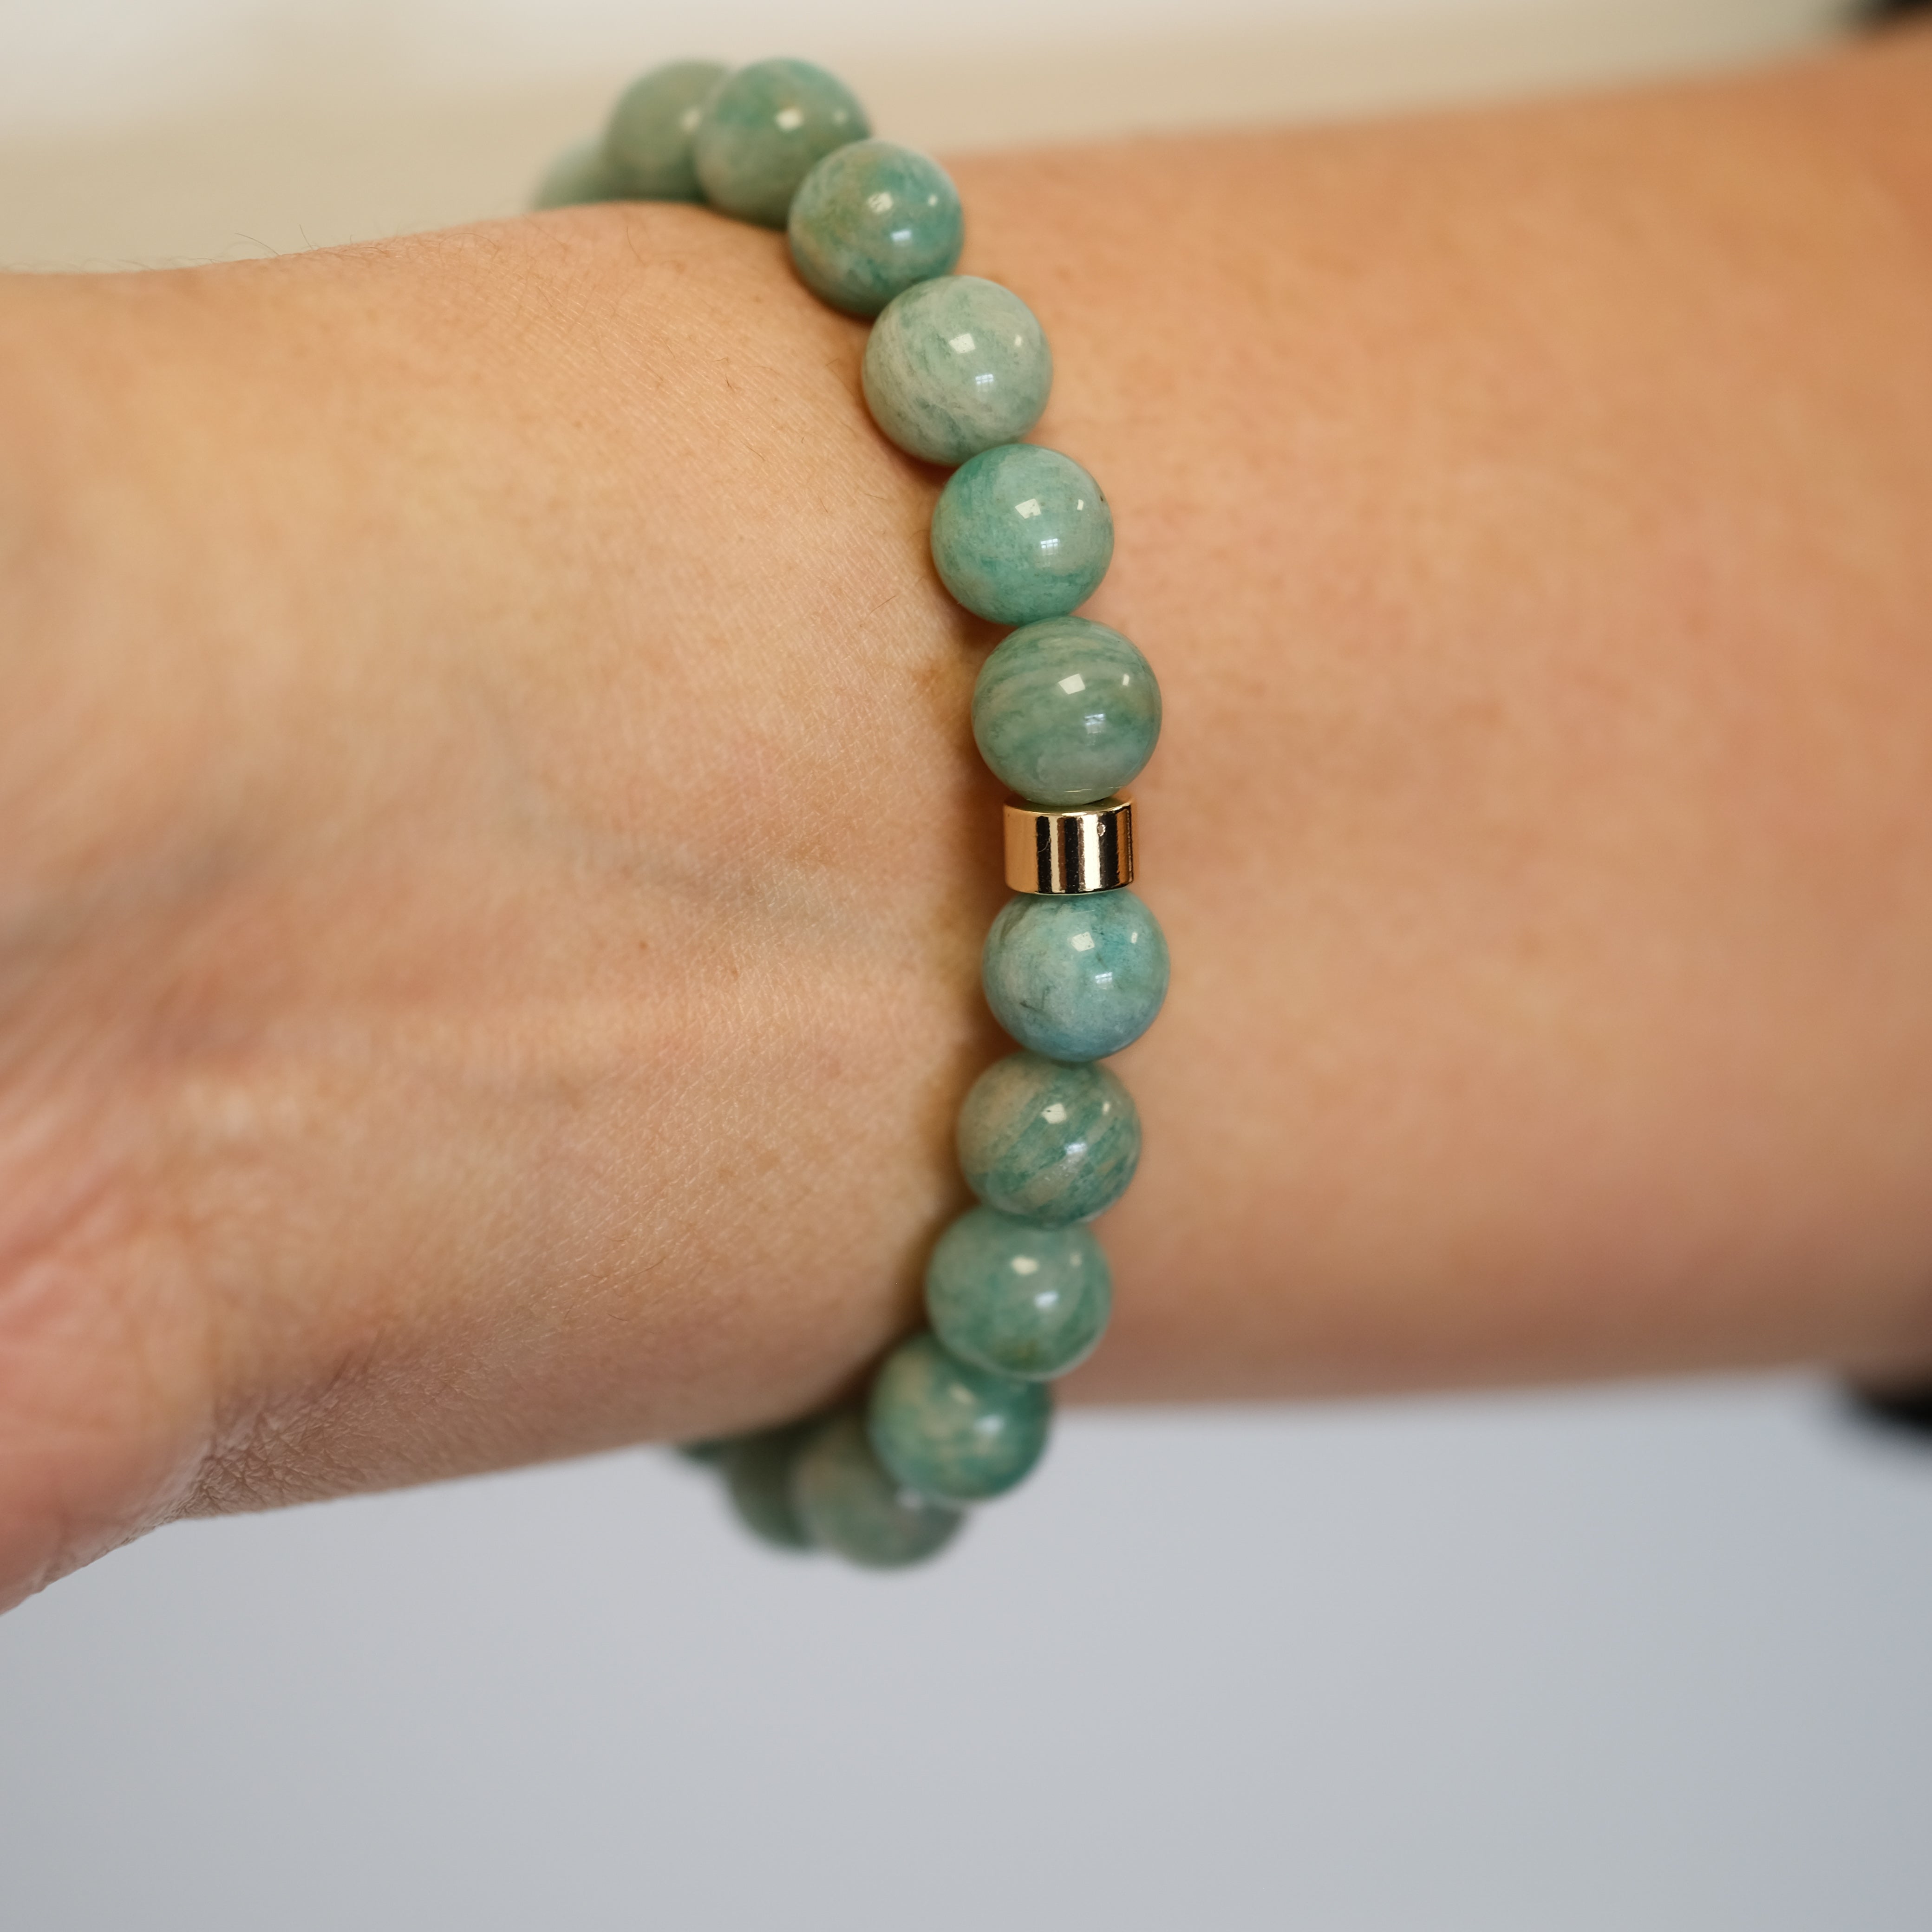 Amazonite gemstone bracelet with gold accessories worn on a model's wrist from the back